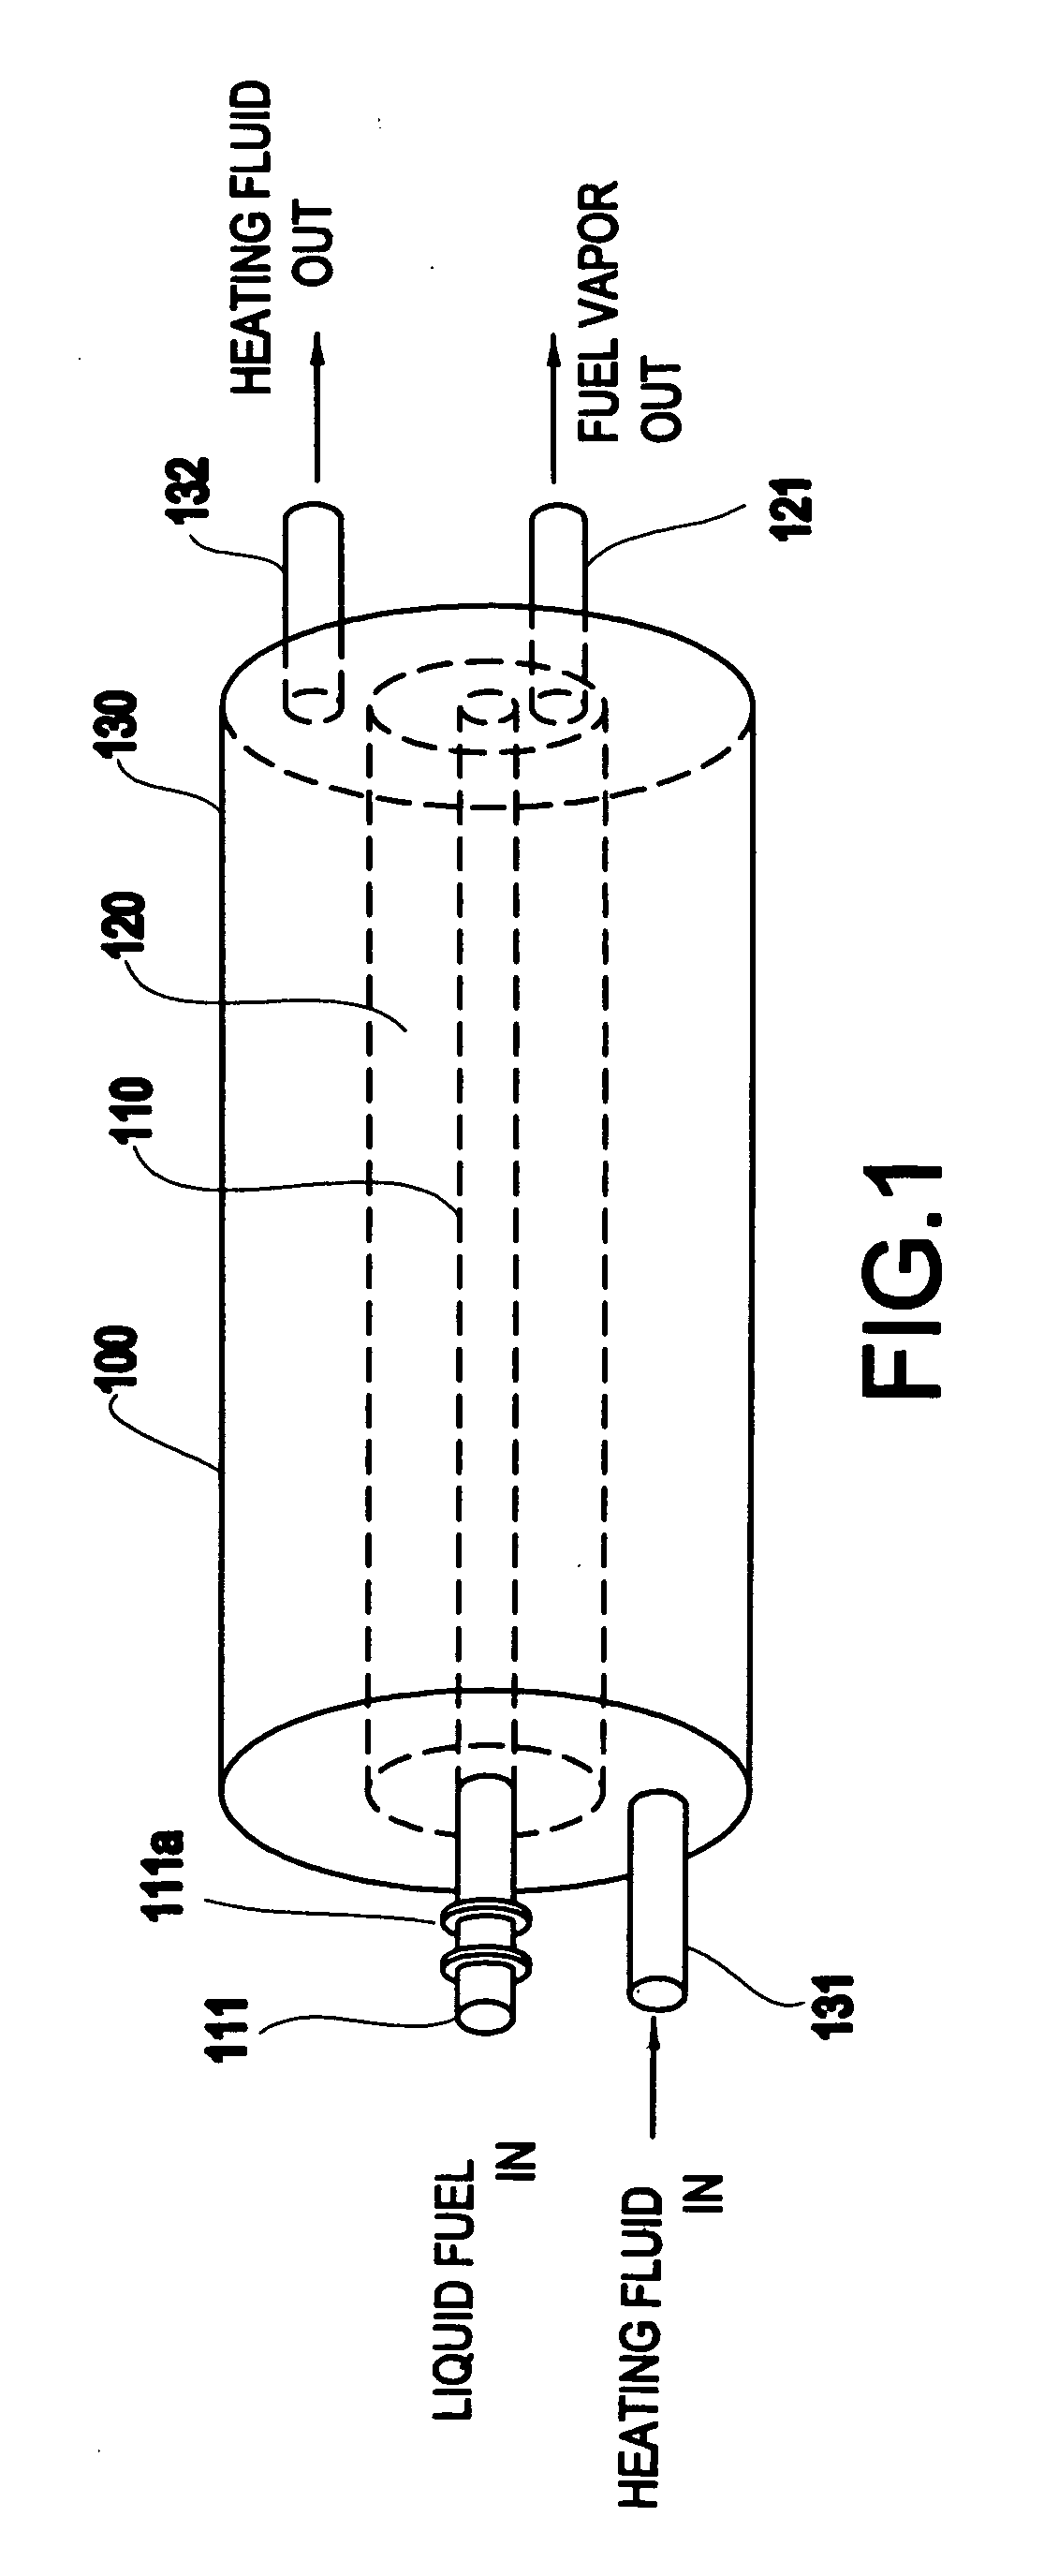 Fuel vaporizer, method of installing the vaporizer, and fuel vaporizer system and method of controlling the system